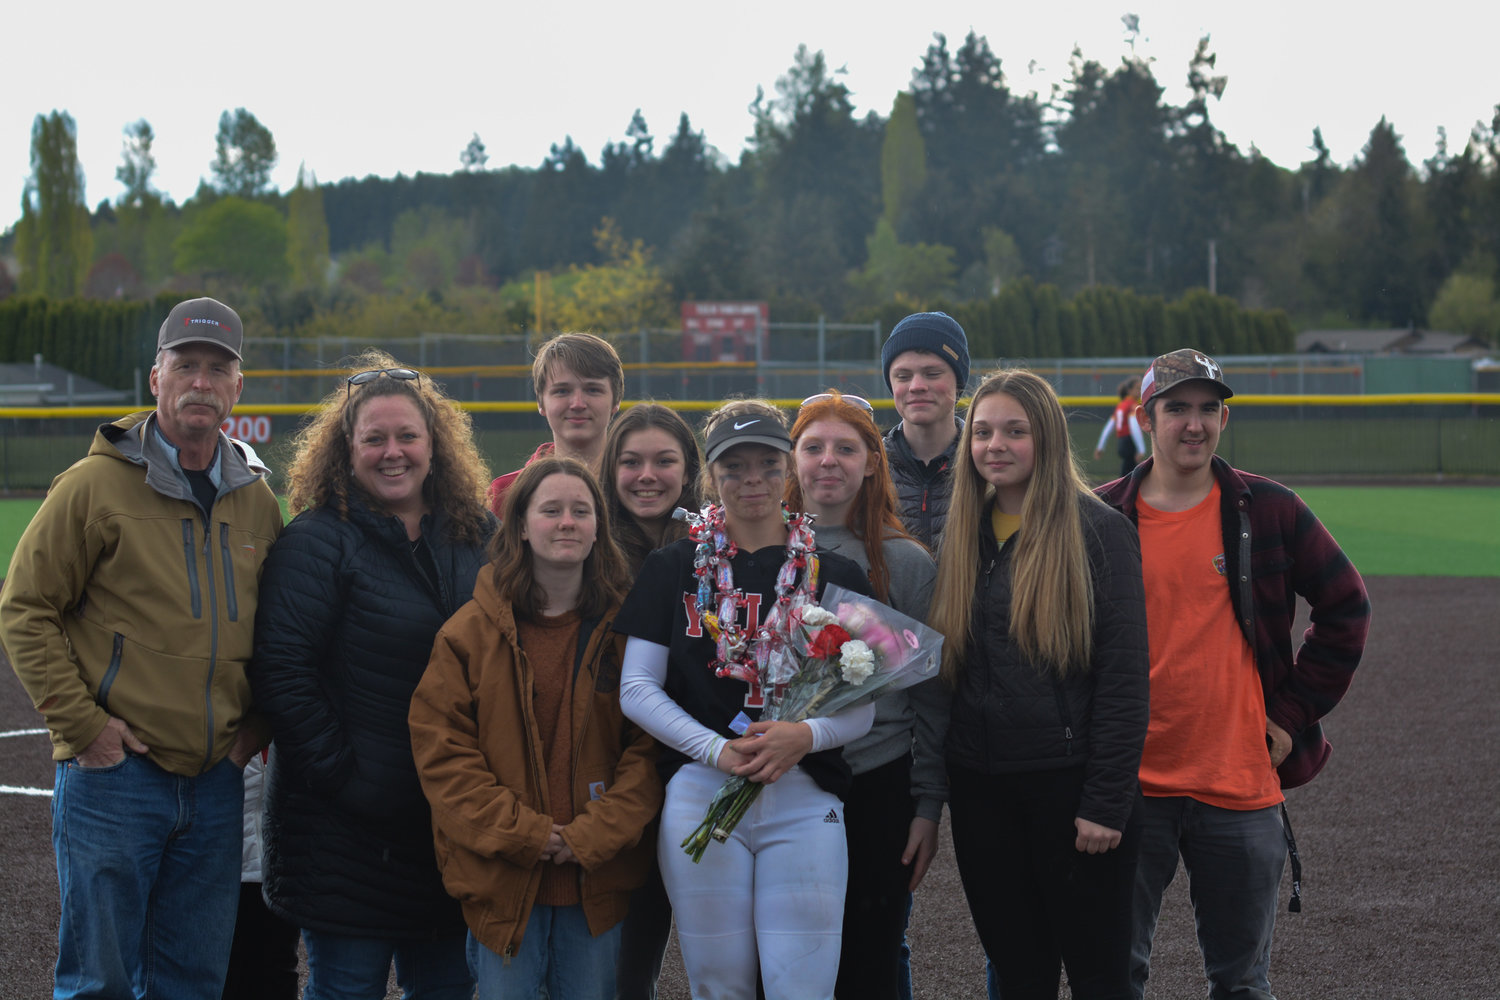 Senior catcher/utility Kendall Lawson poses for a photo with her family following the senior night contest on May 9.